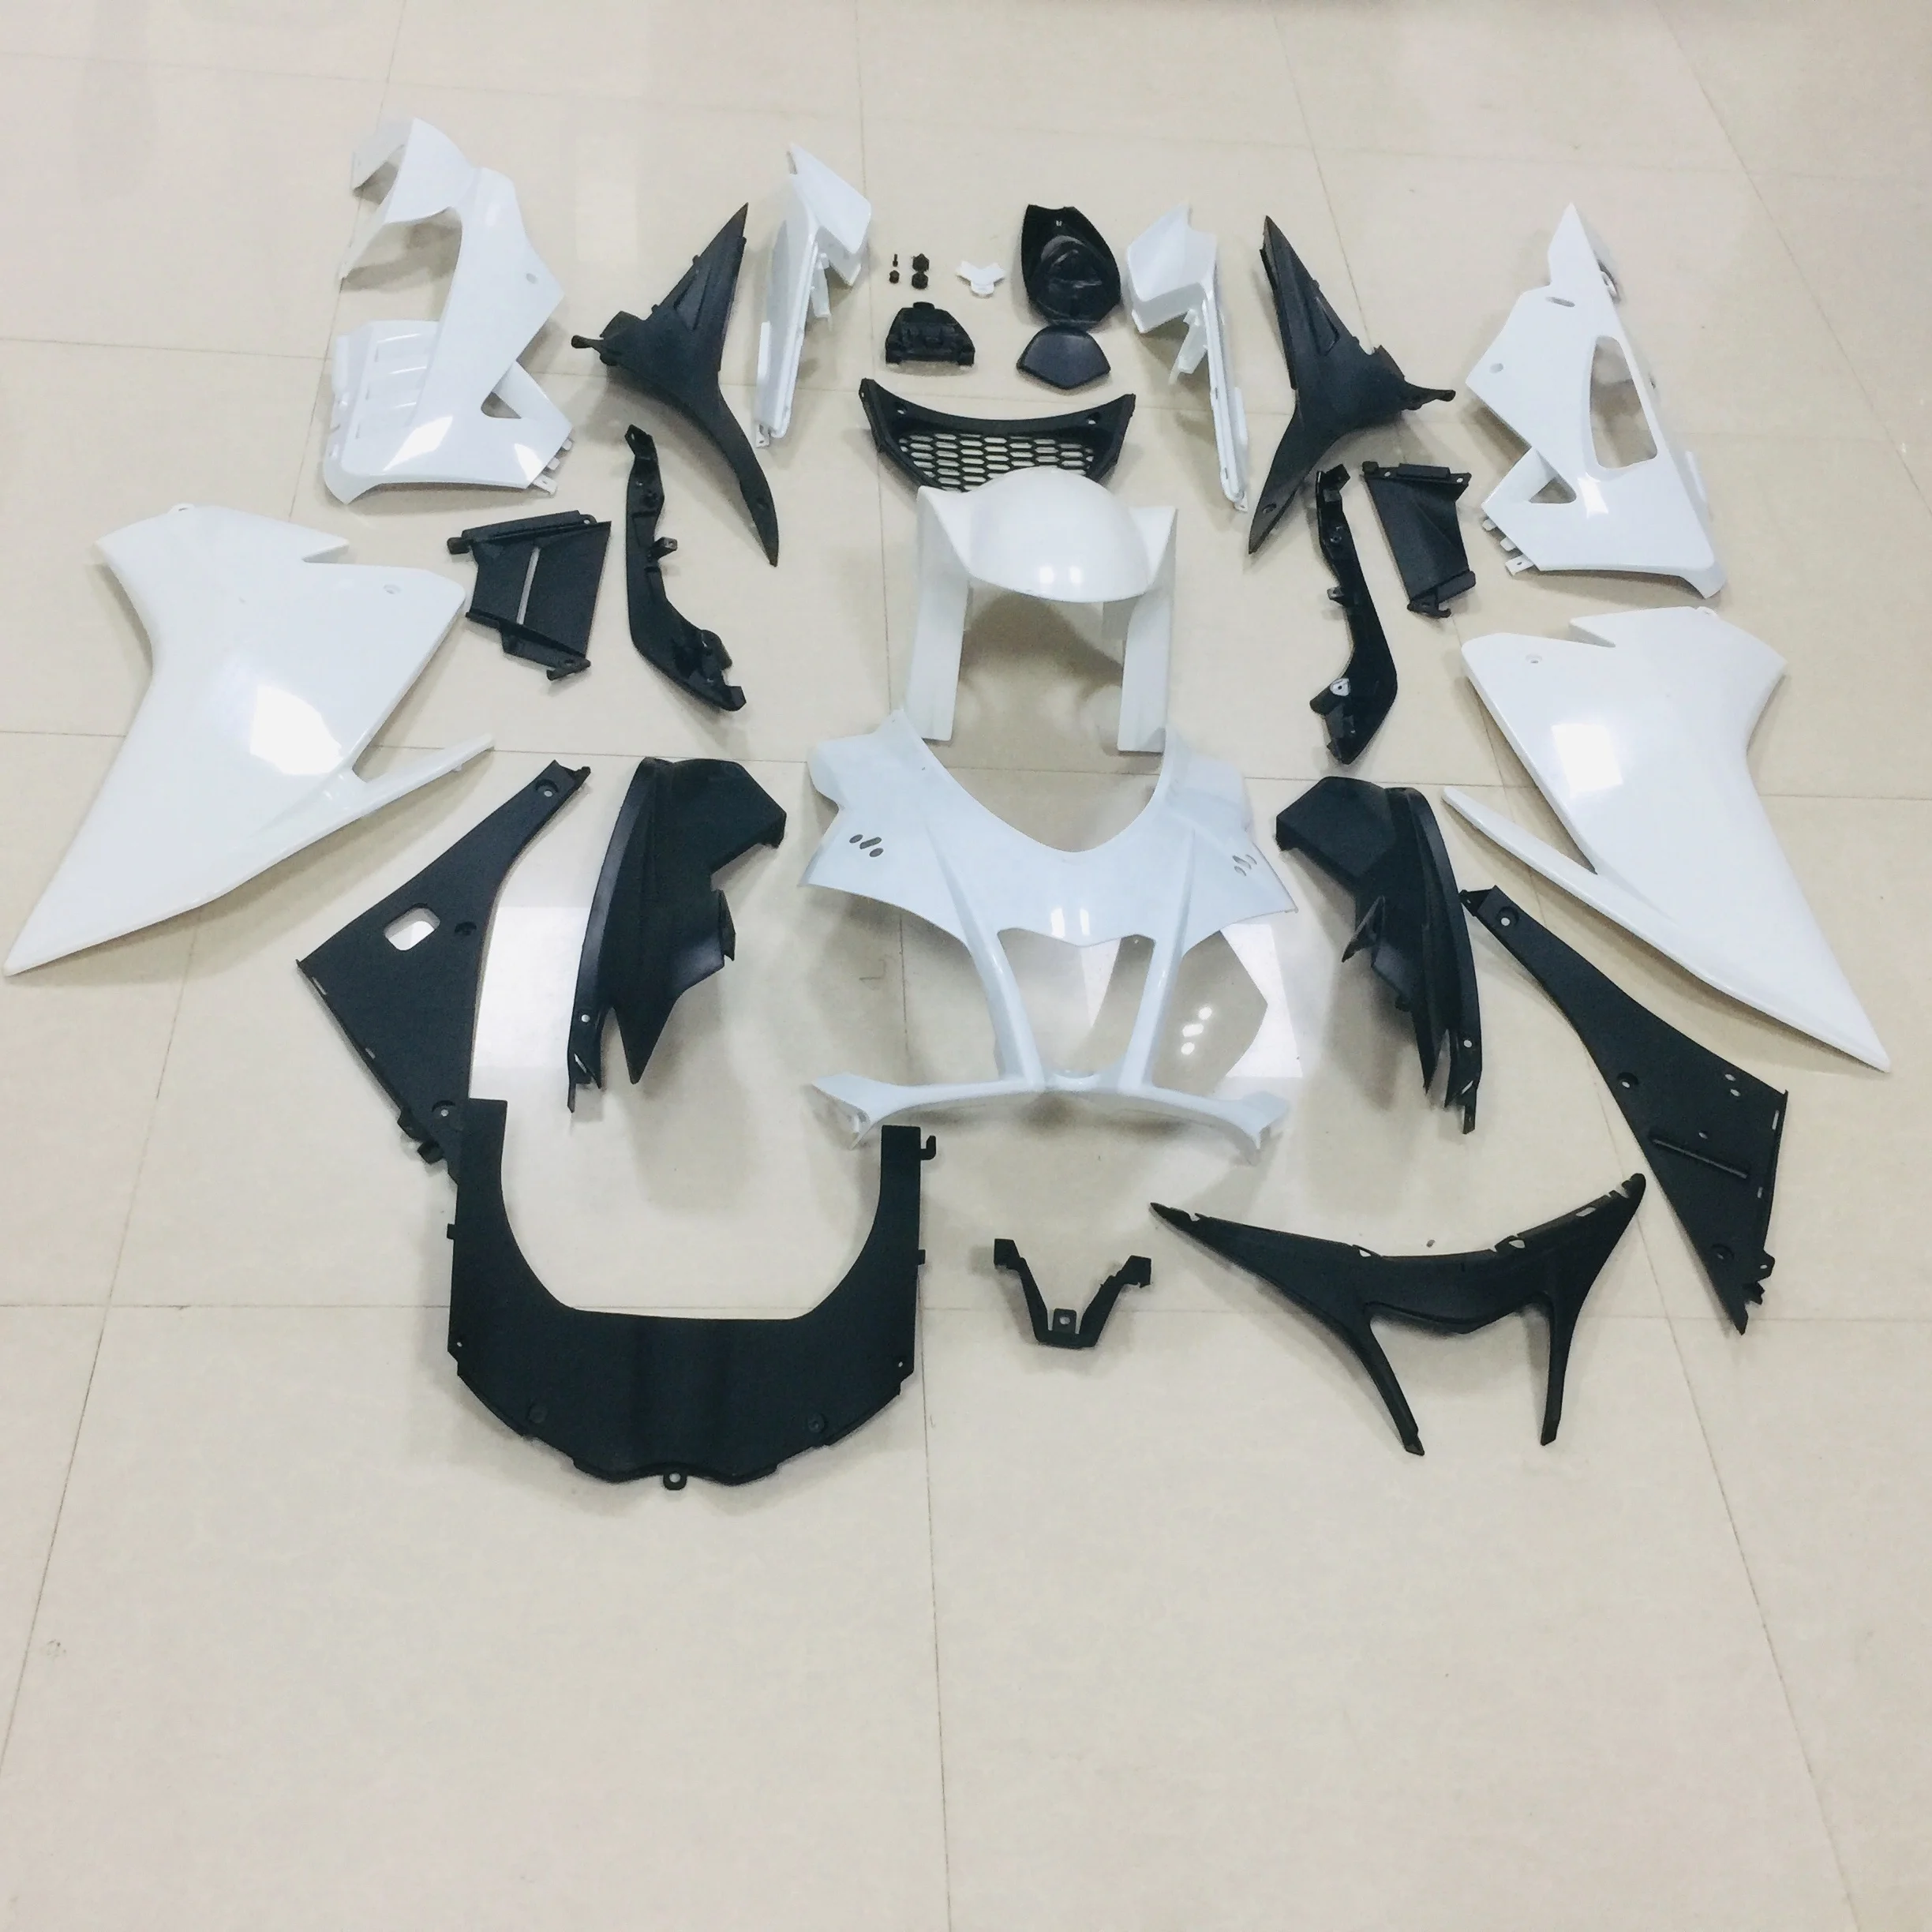 

2022 WHSC Unpainted Fairings For KAWASAKI Z400 2019 2020 2021 2022 ABS Plastic Bodywork Kit, Pictures shown